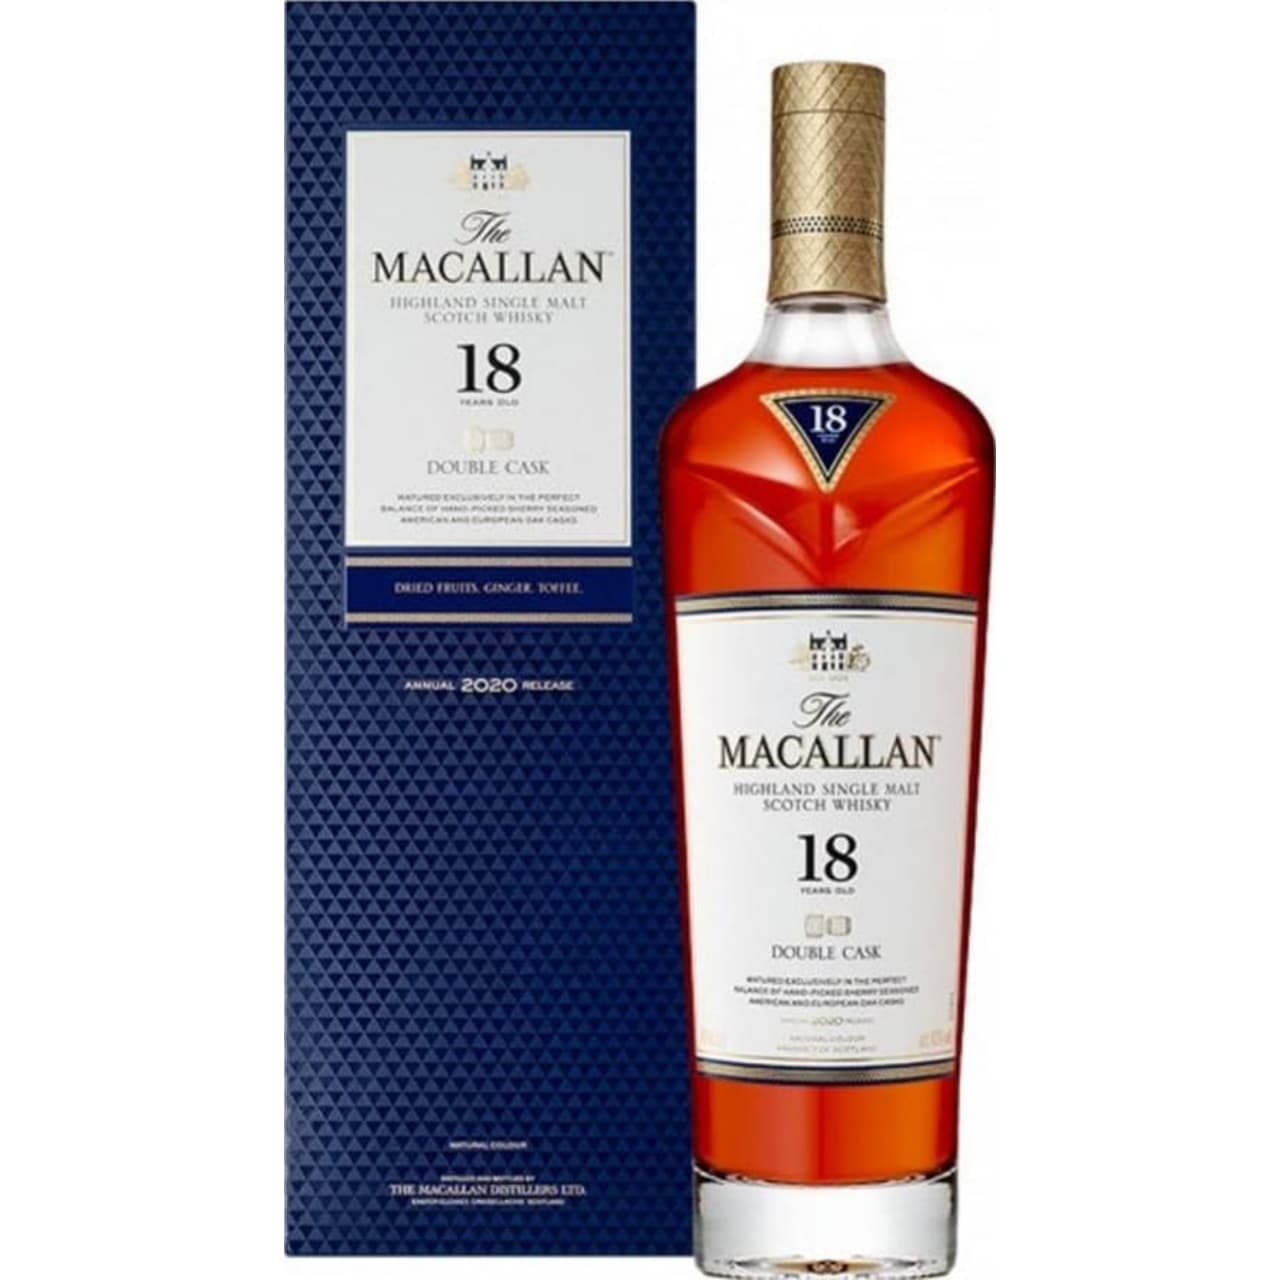 Product Image - The Macallan Double Cask 18 Year Old Single Malt Whisky